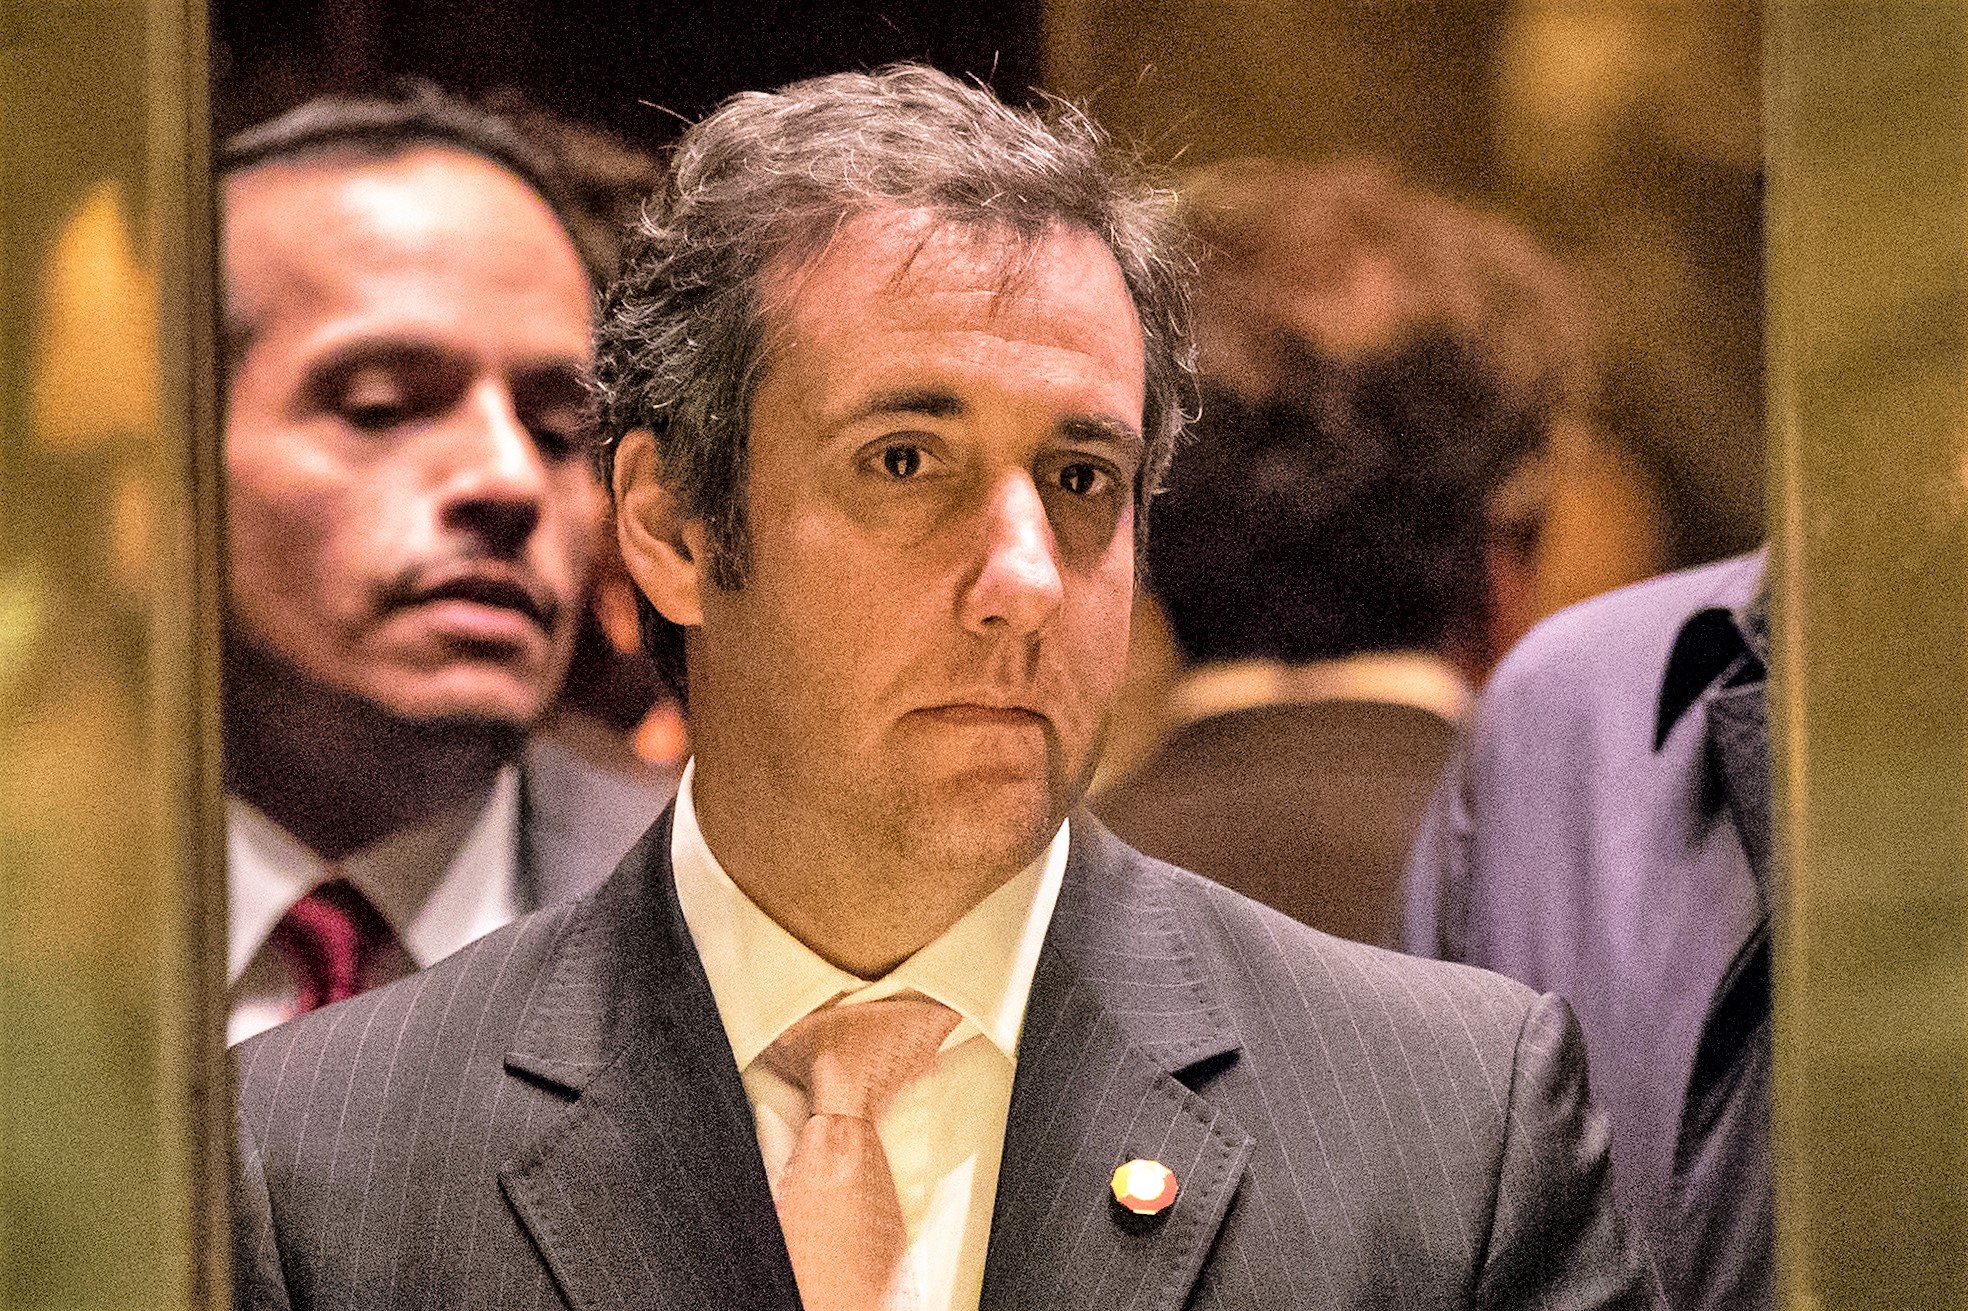 Michael Cohen, Attorney for Donald Trump and Essential Consultants, LLC